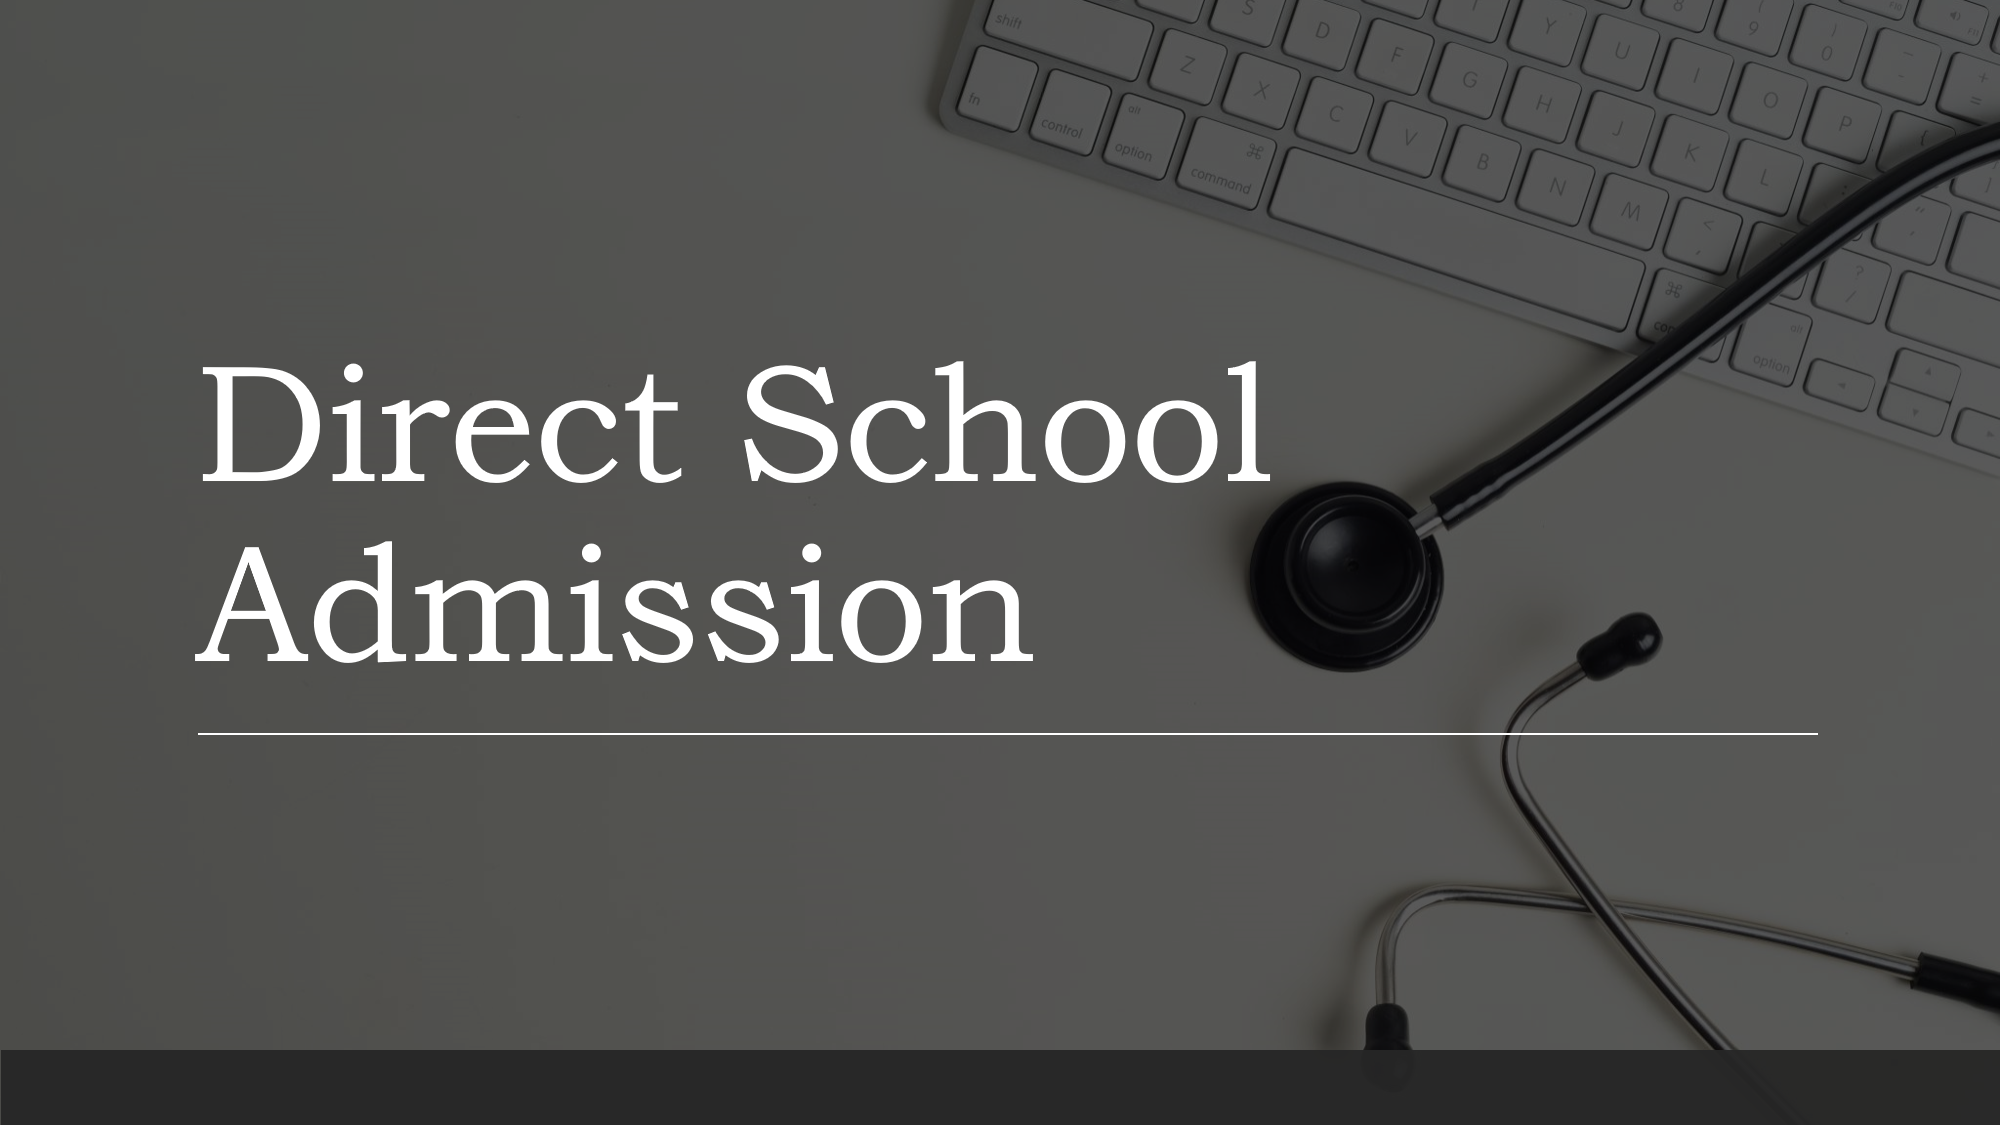 Direct School Admission: Part 2, Sharing my experience